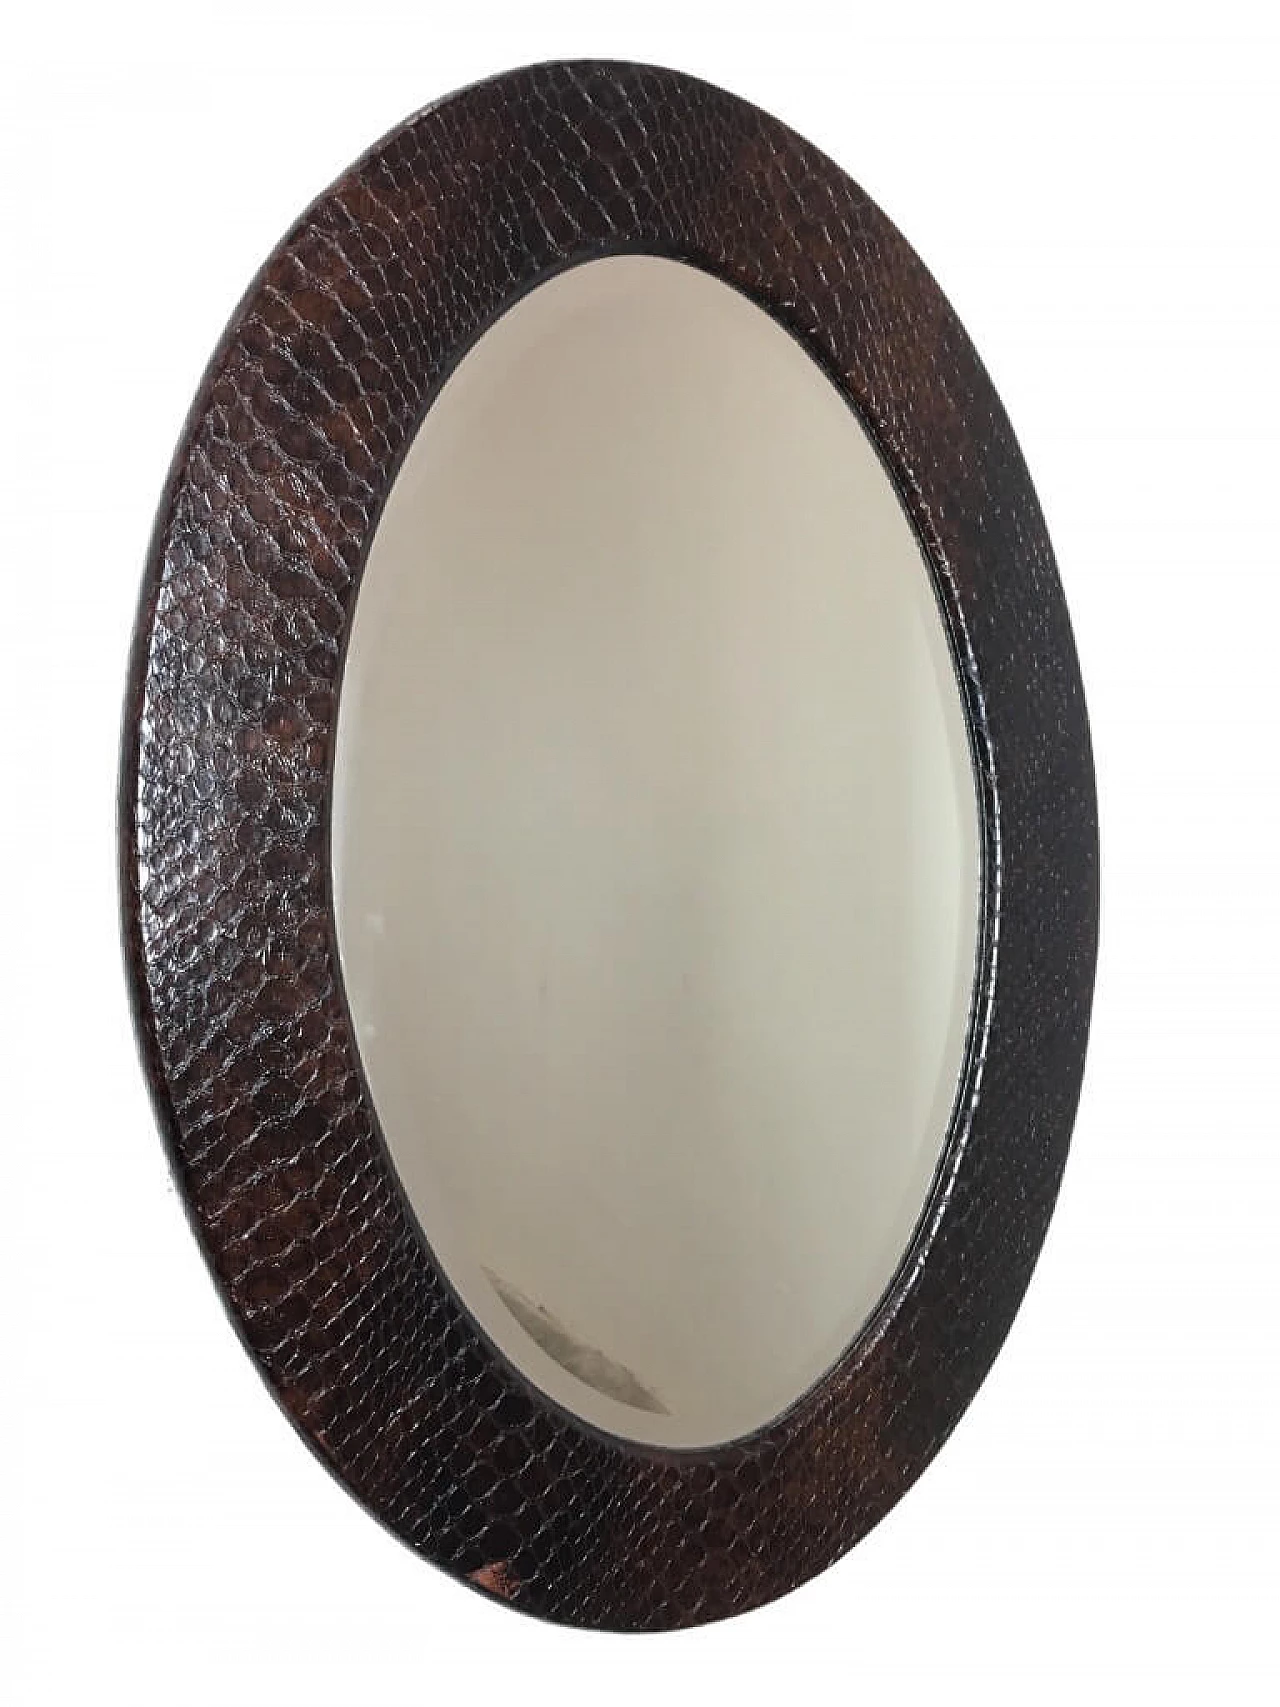 Oval mirror, 60s 1195584